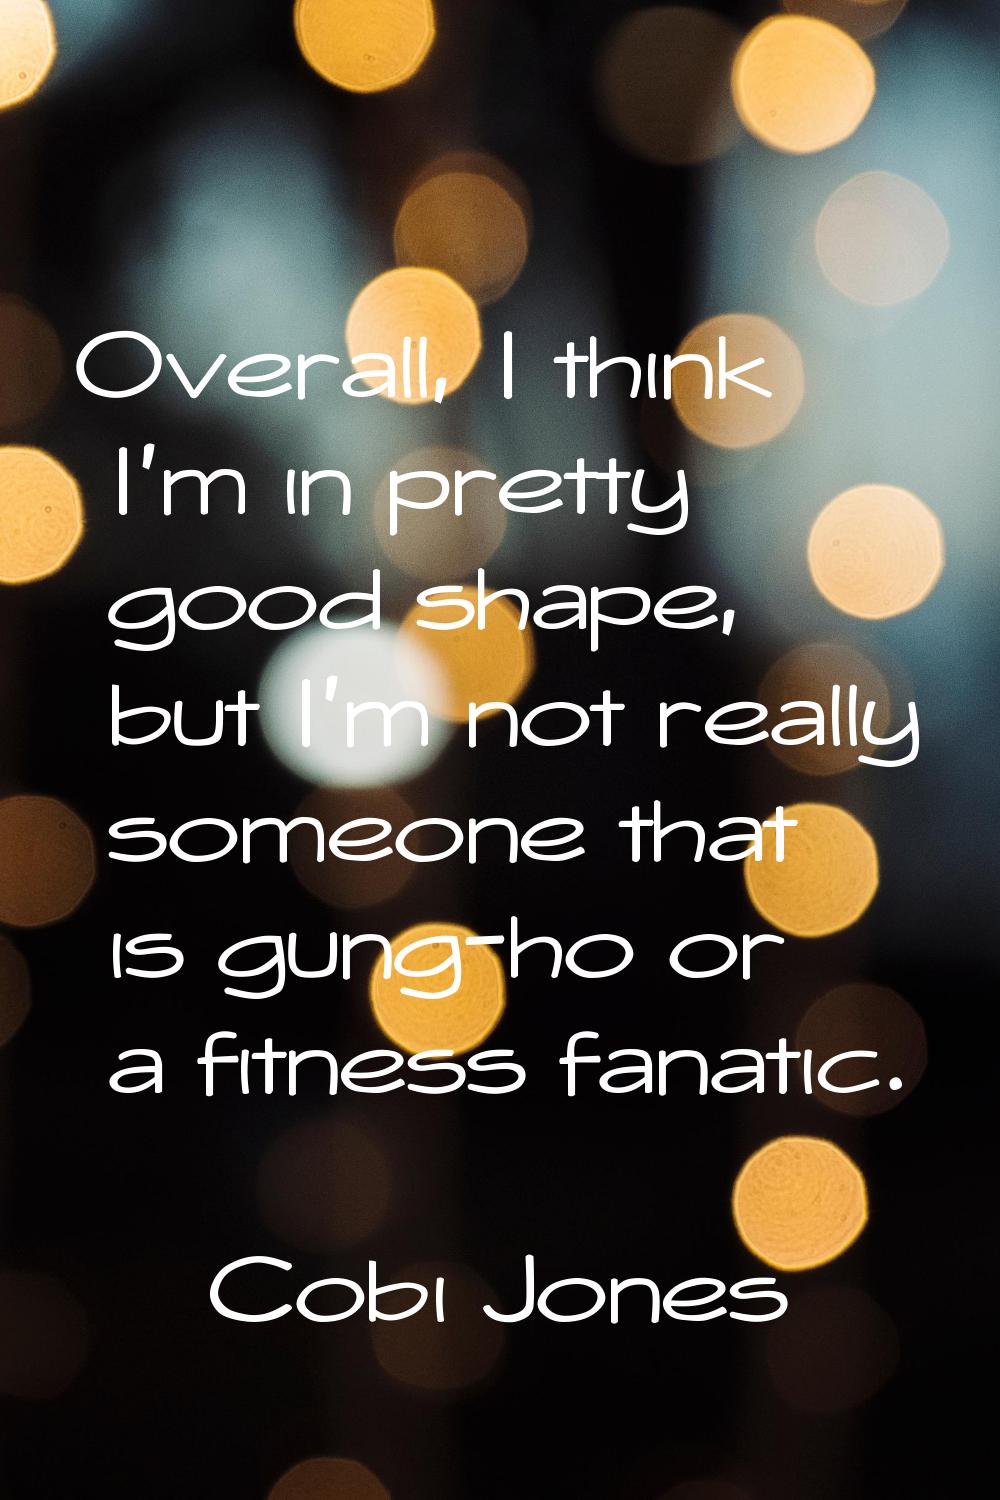 Overall, I think I'm in pretty good shape, but I'm not really someone that is gung-ho or a fitness 